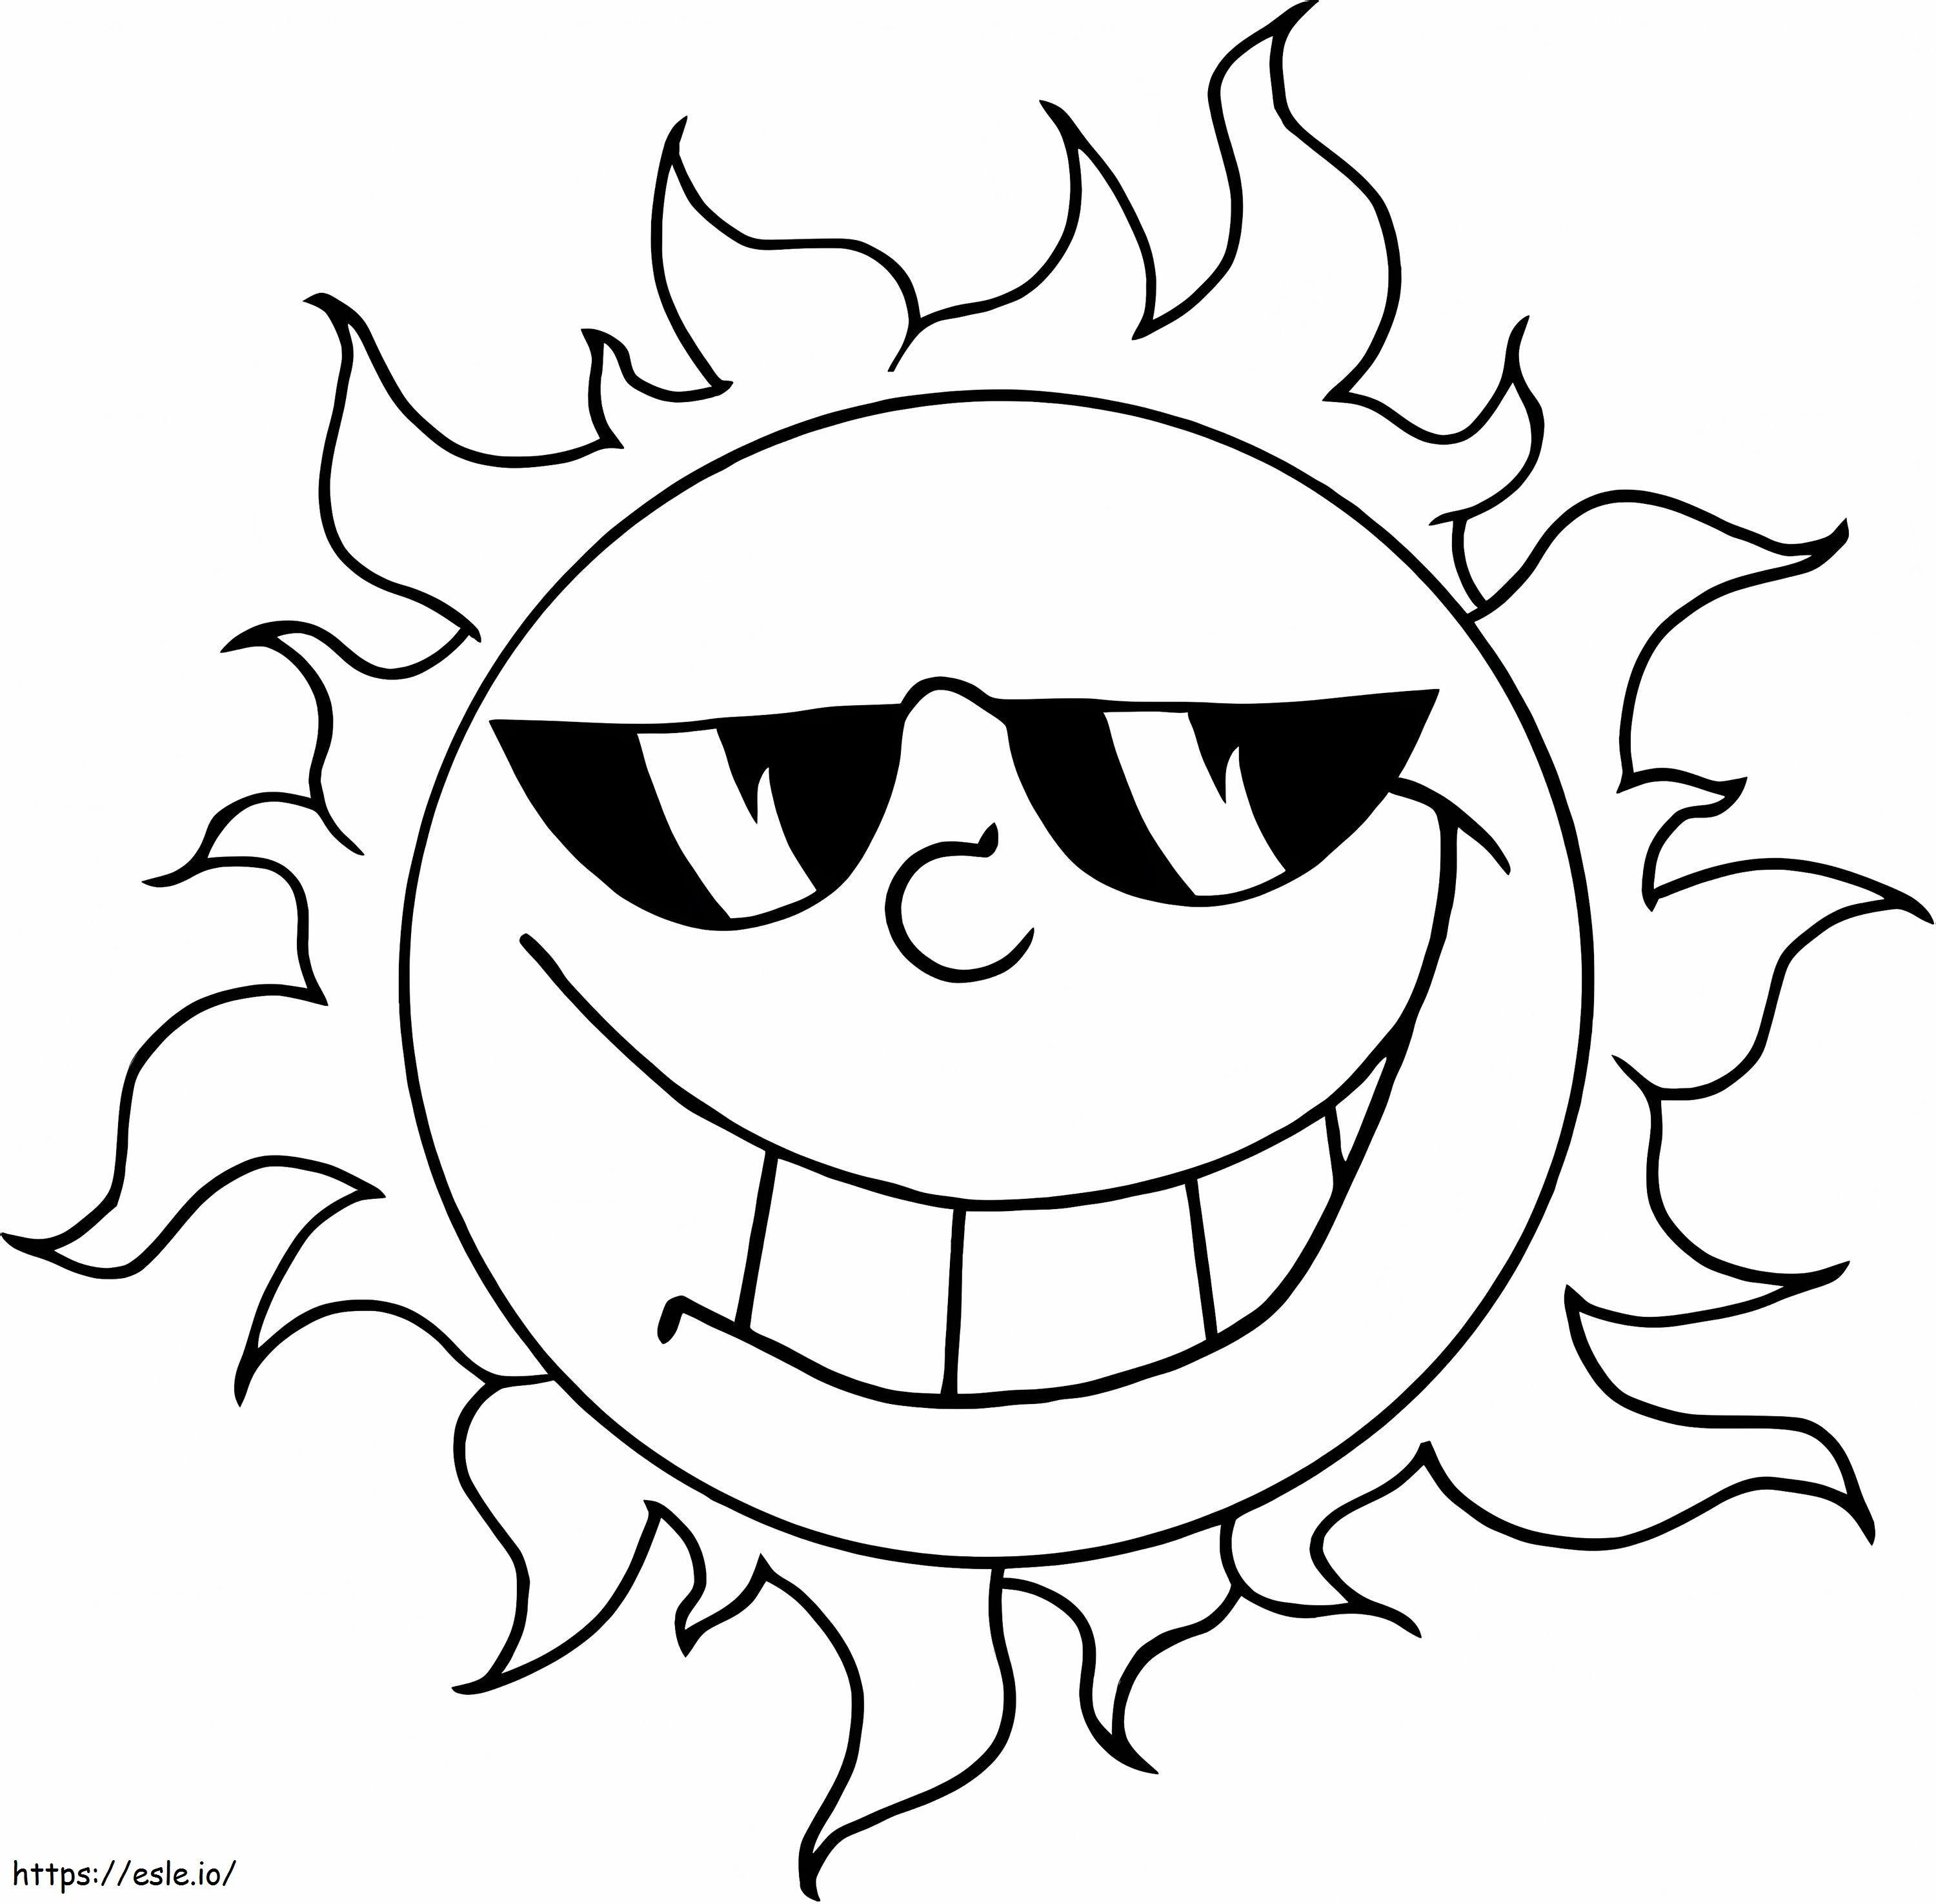 Funny Sun coloring page